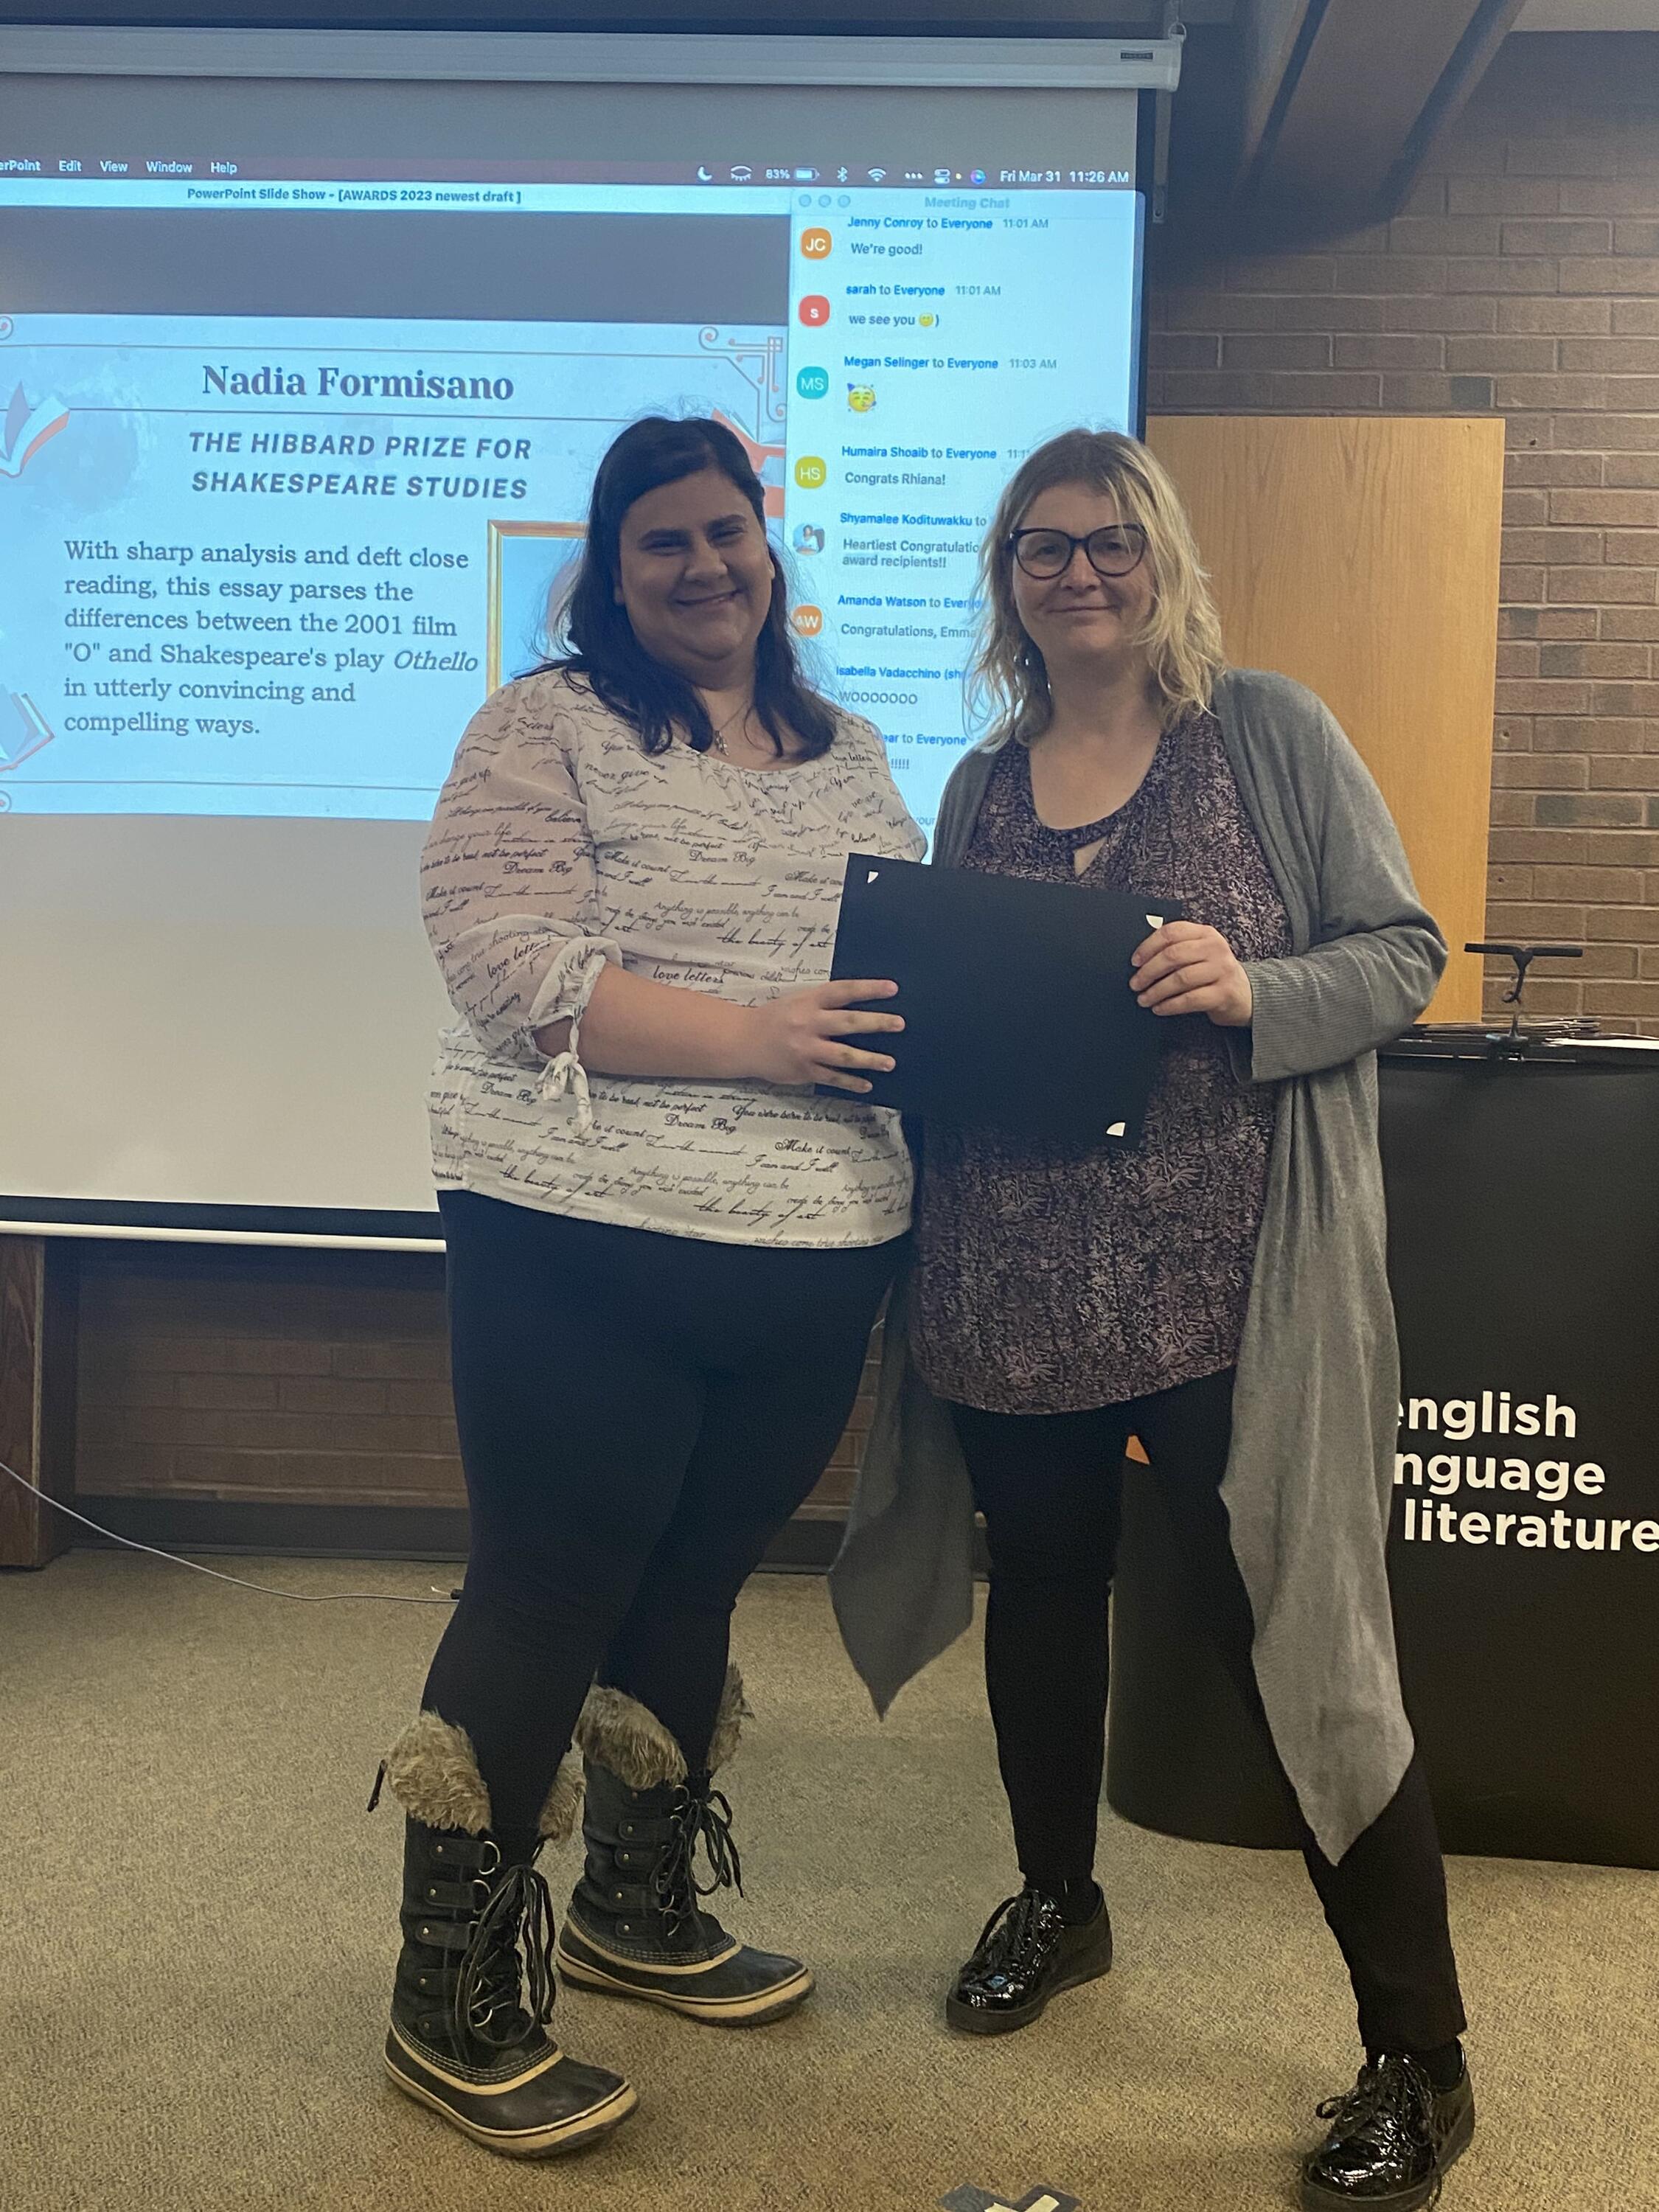 Nadia Formisano receives the Hibbard Prize for Shakespeare Studies from Dr. Victoria Lamont.